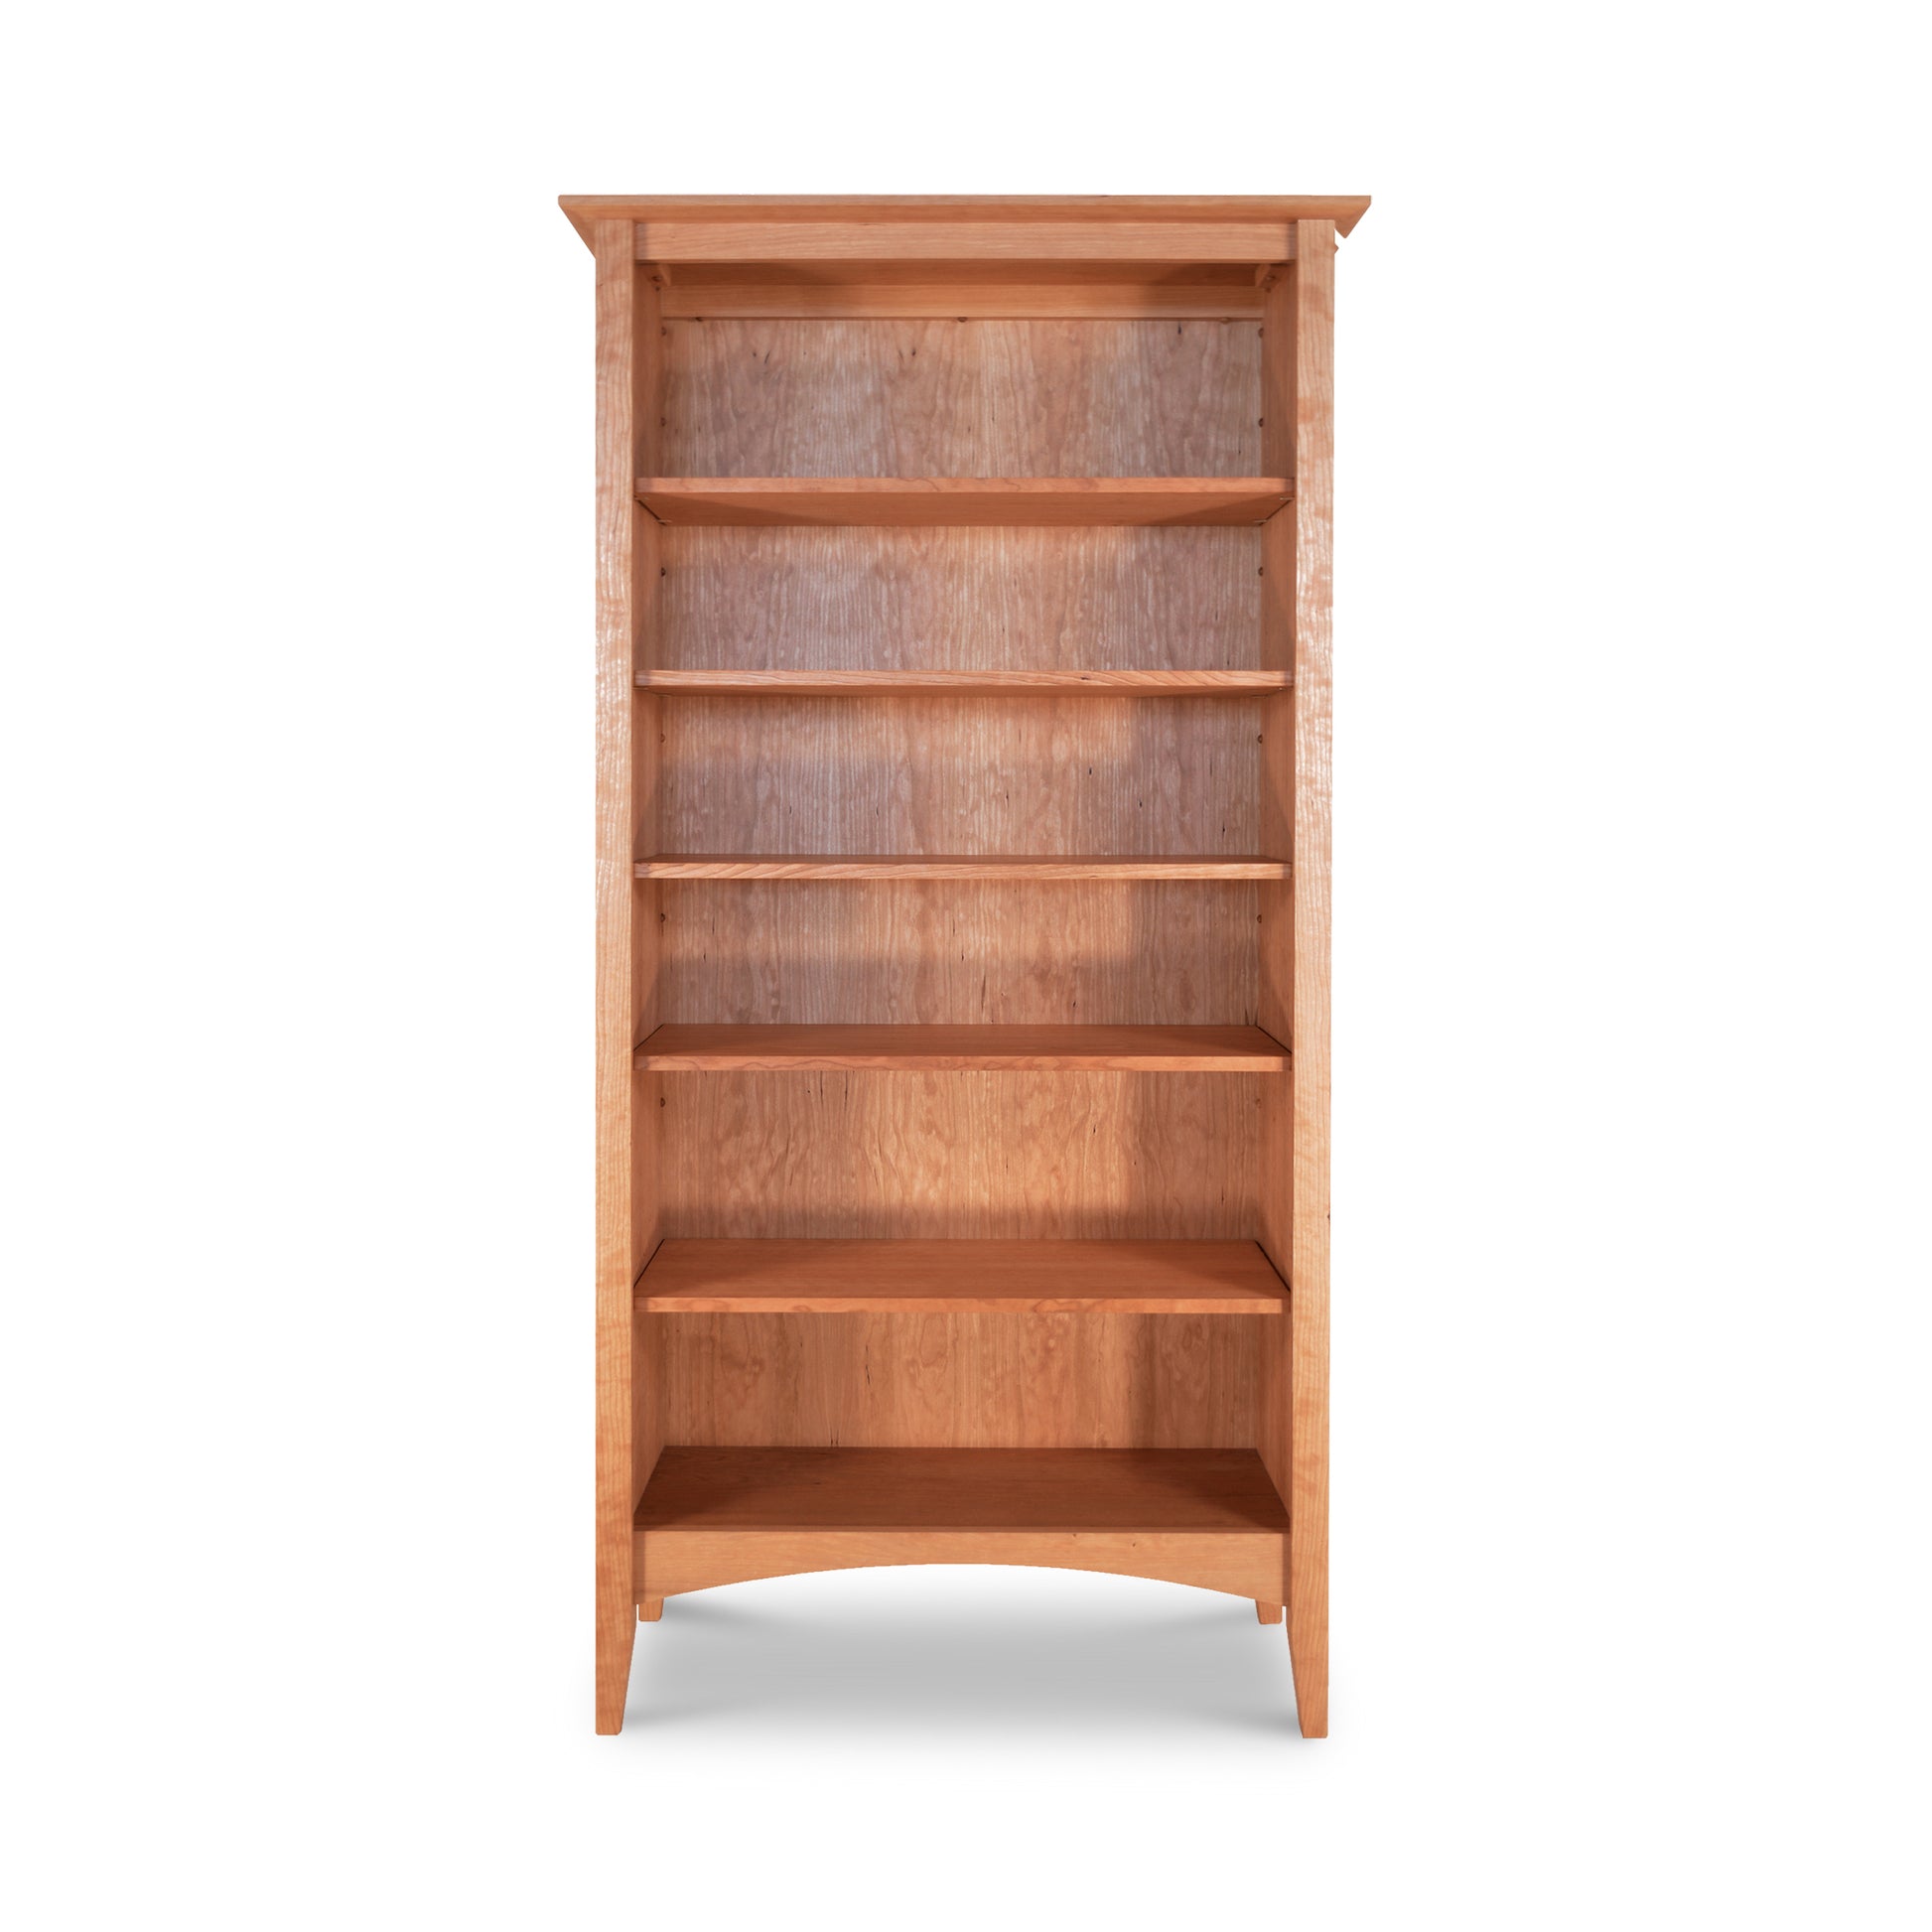 An American Shaker bookcase from Maple Corner Woodworks crafted from sustainably harvested hardwoods, with empty shelves isolated against a white background.